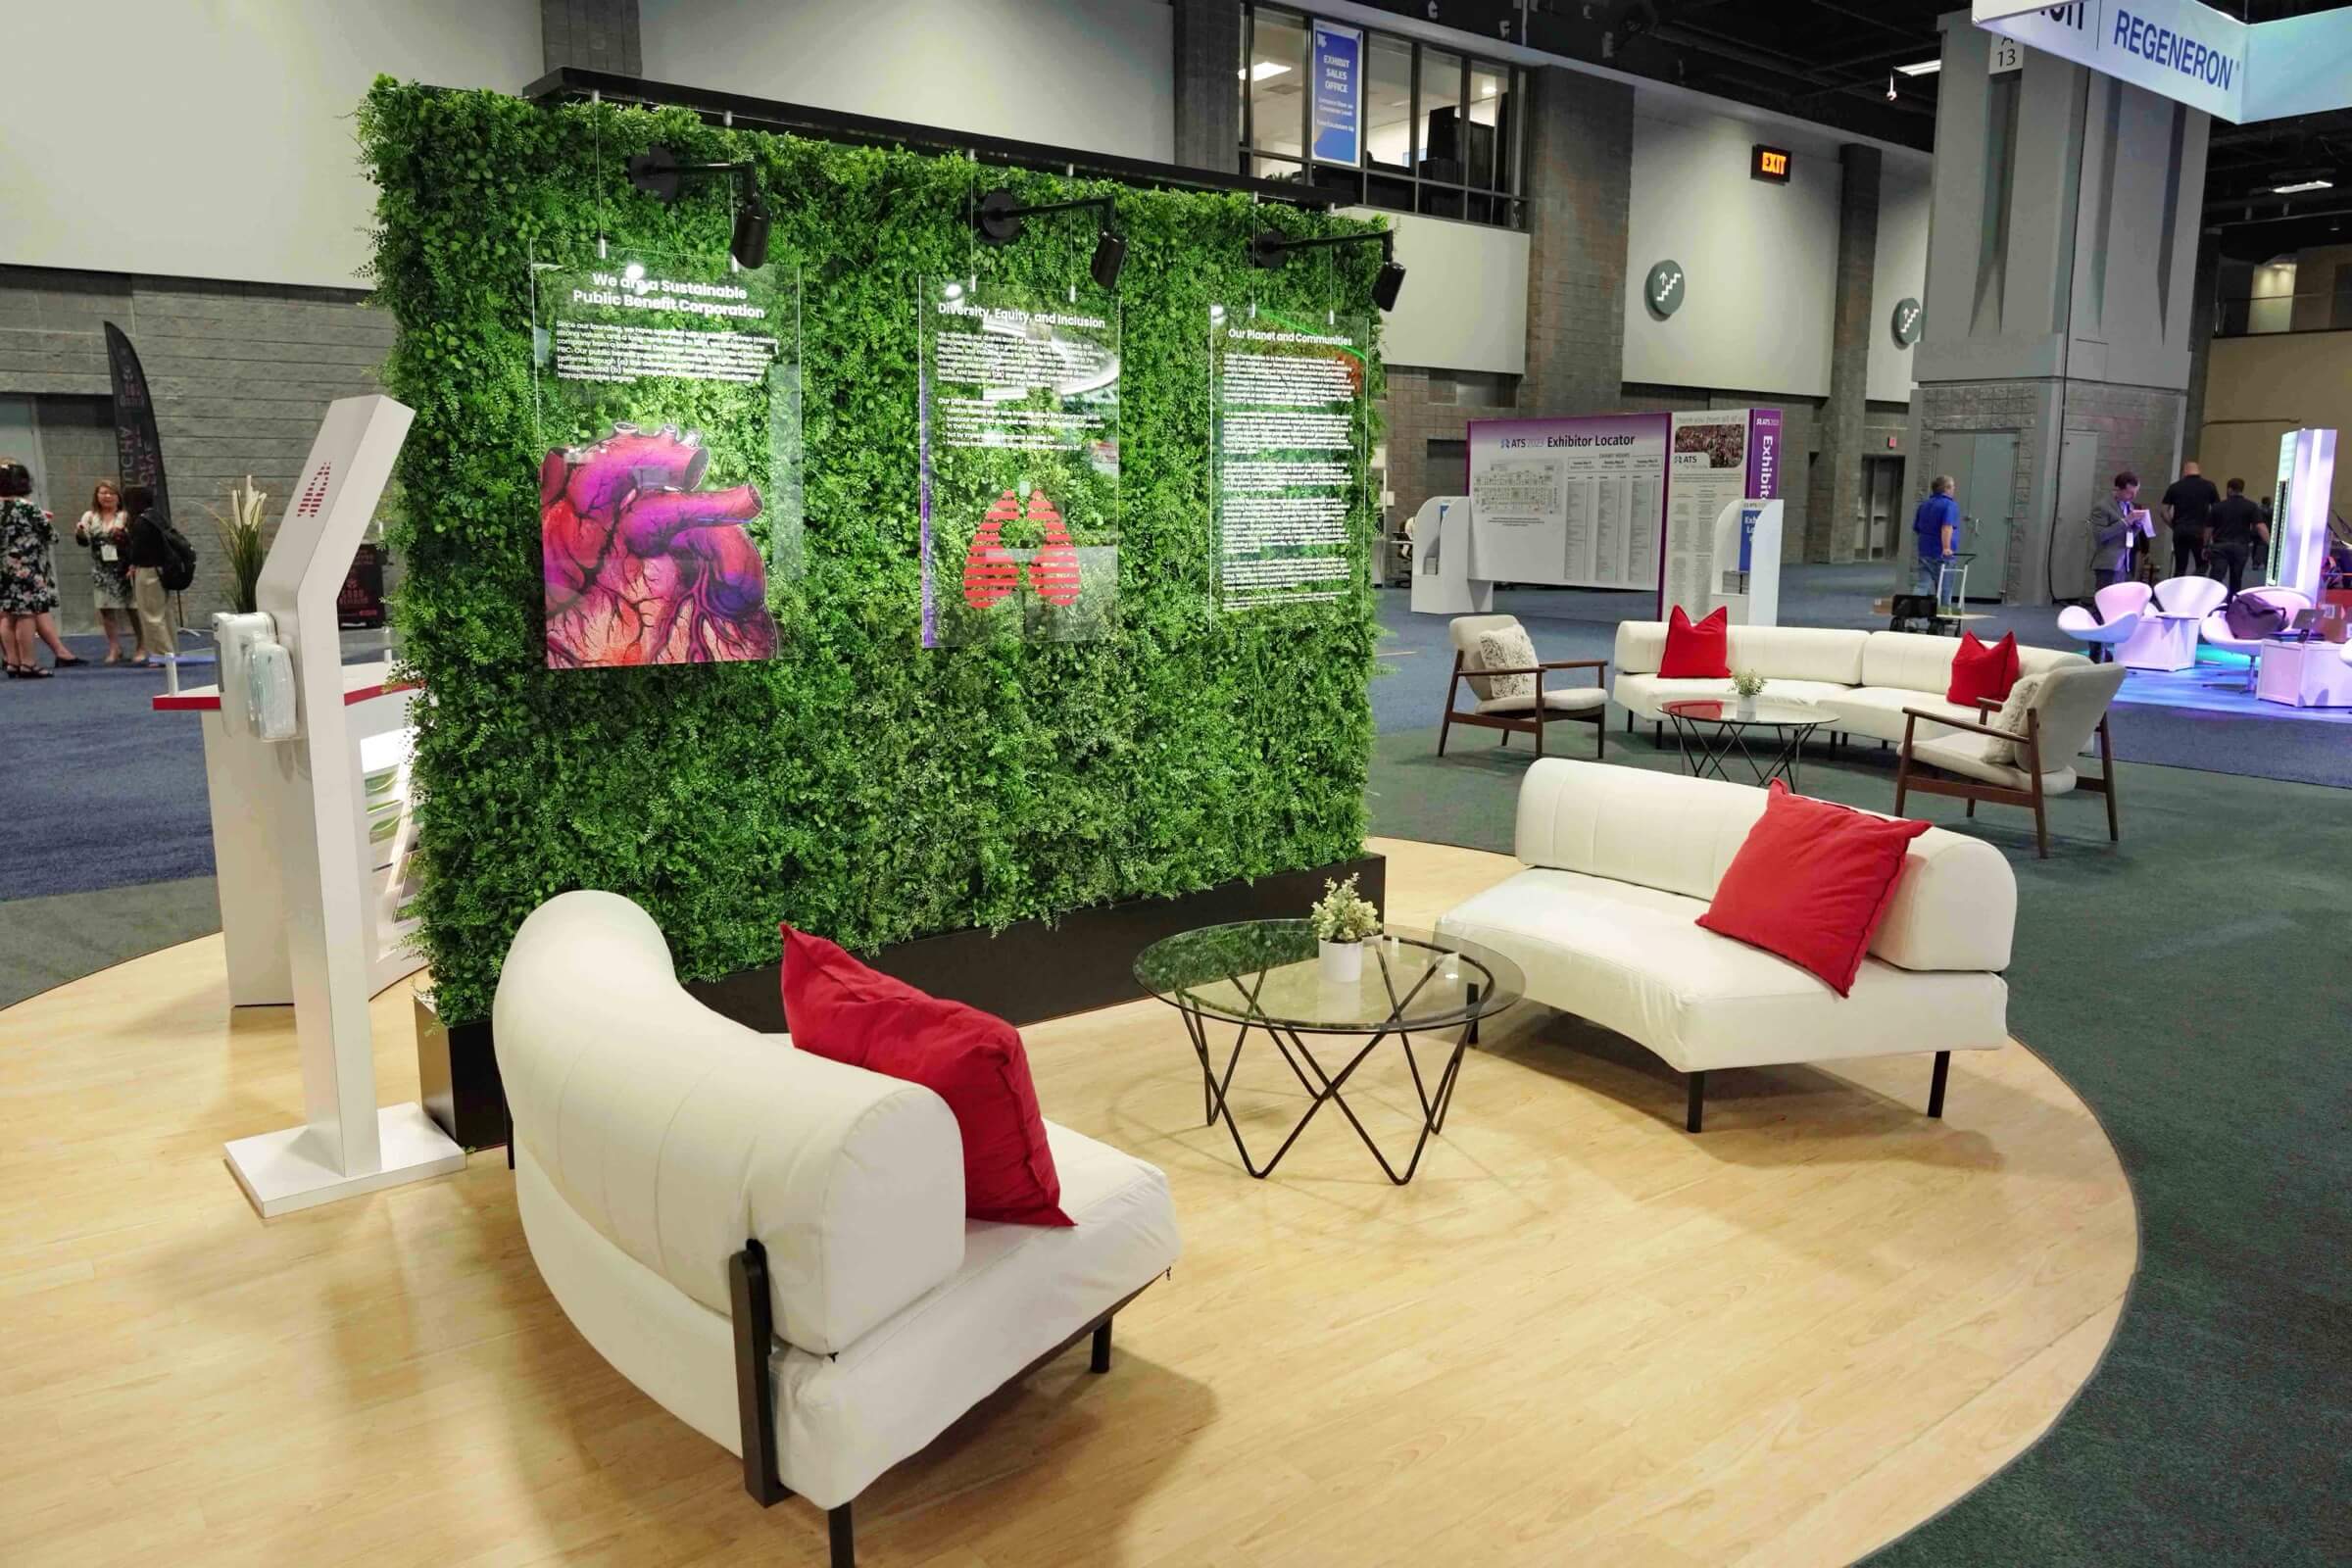 Seating area in front of a vegetation wall in an event